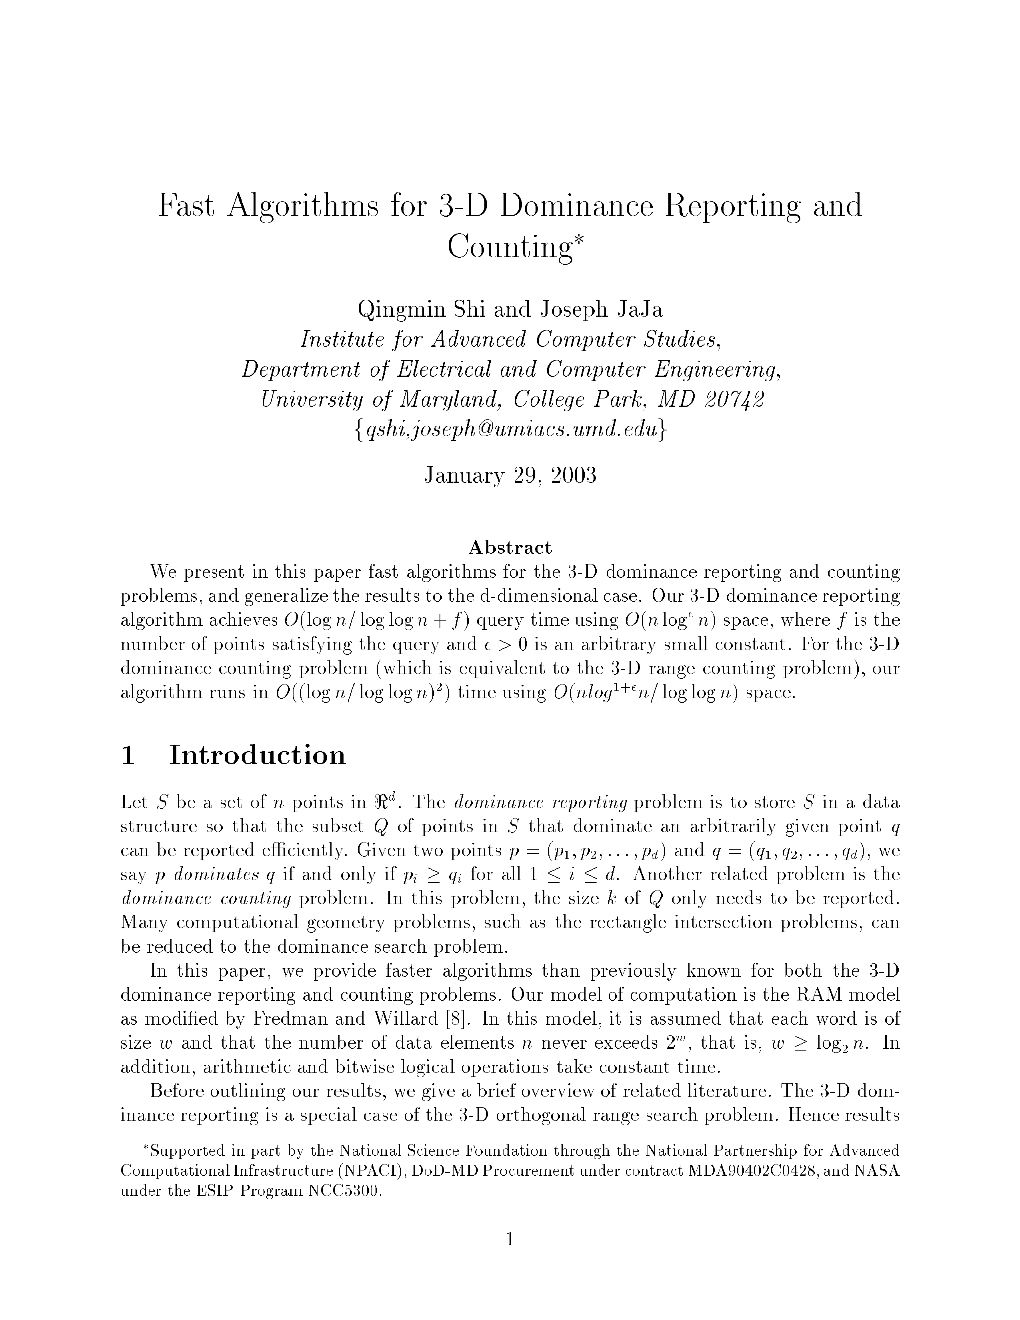 Fast Algorithms for 3-D Dominance Reporting and Counting